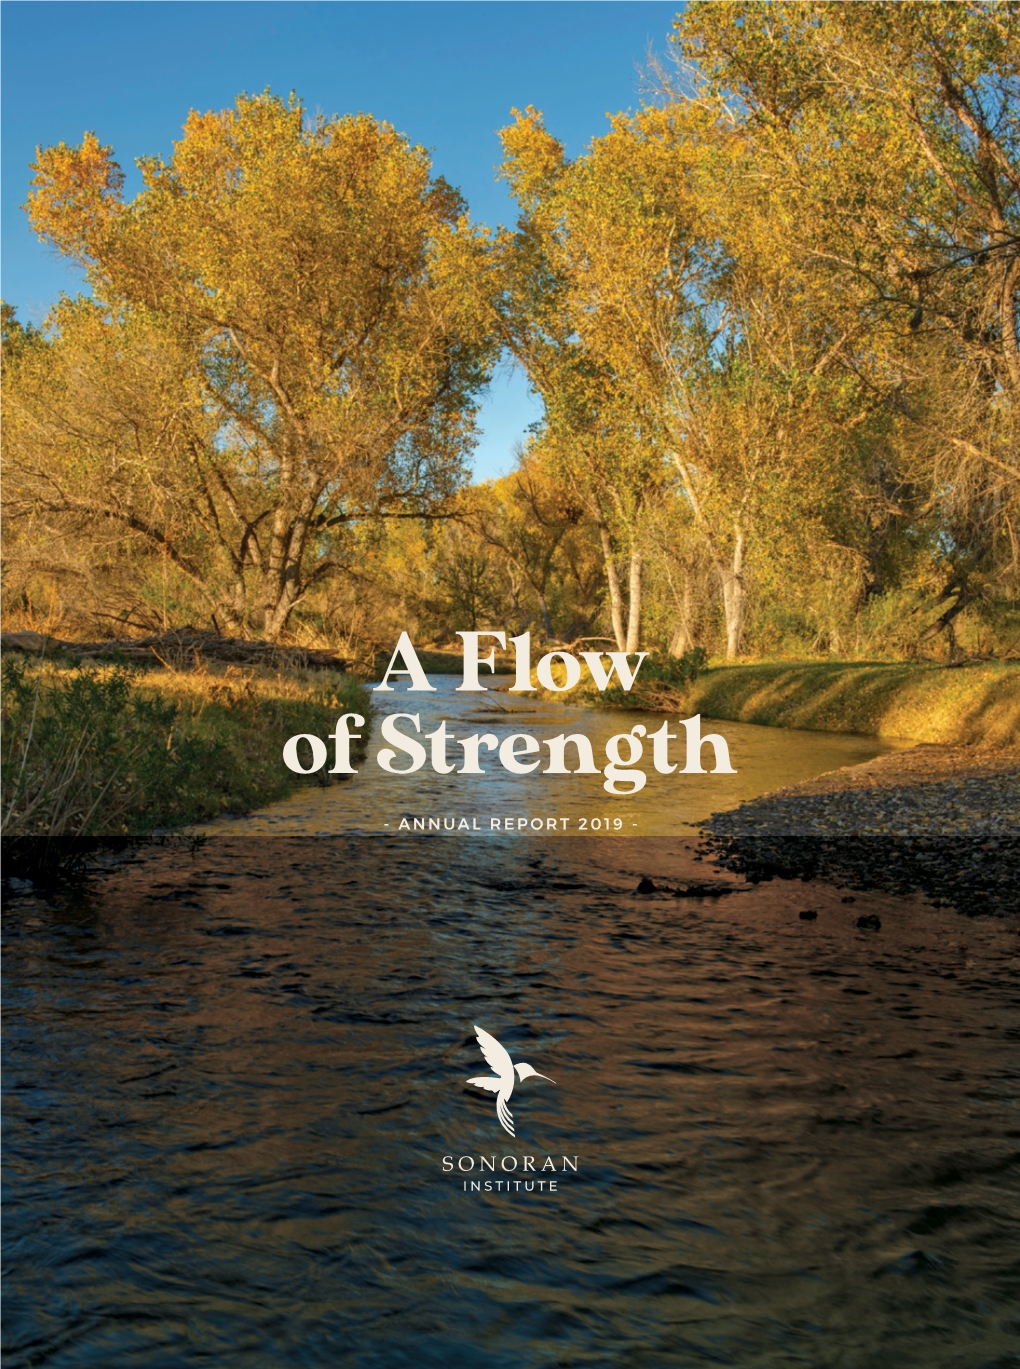 A Flow of Strength